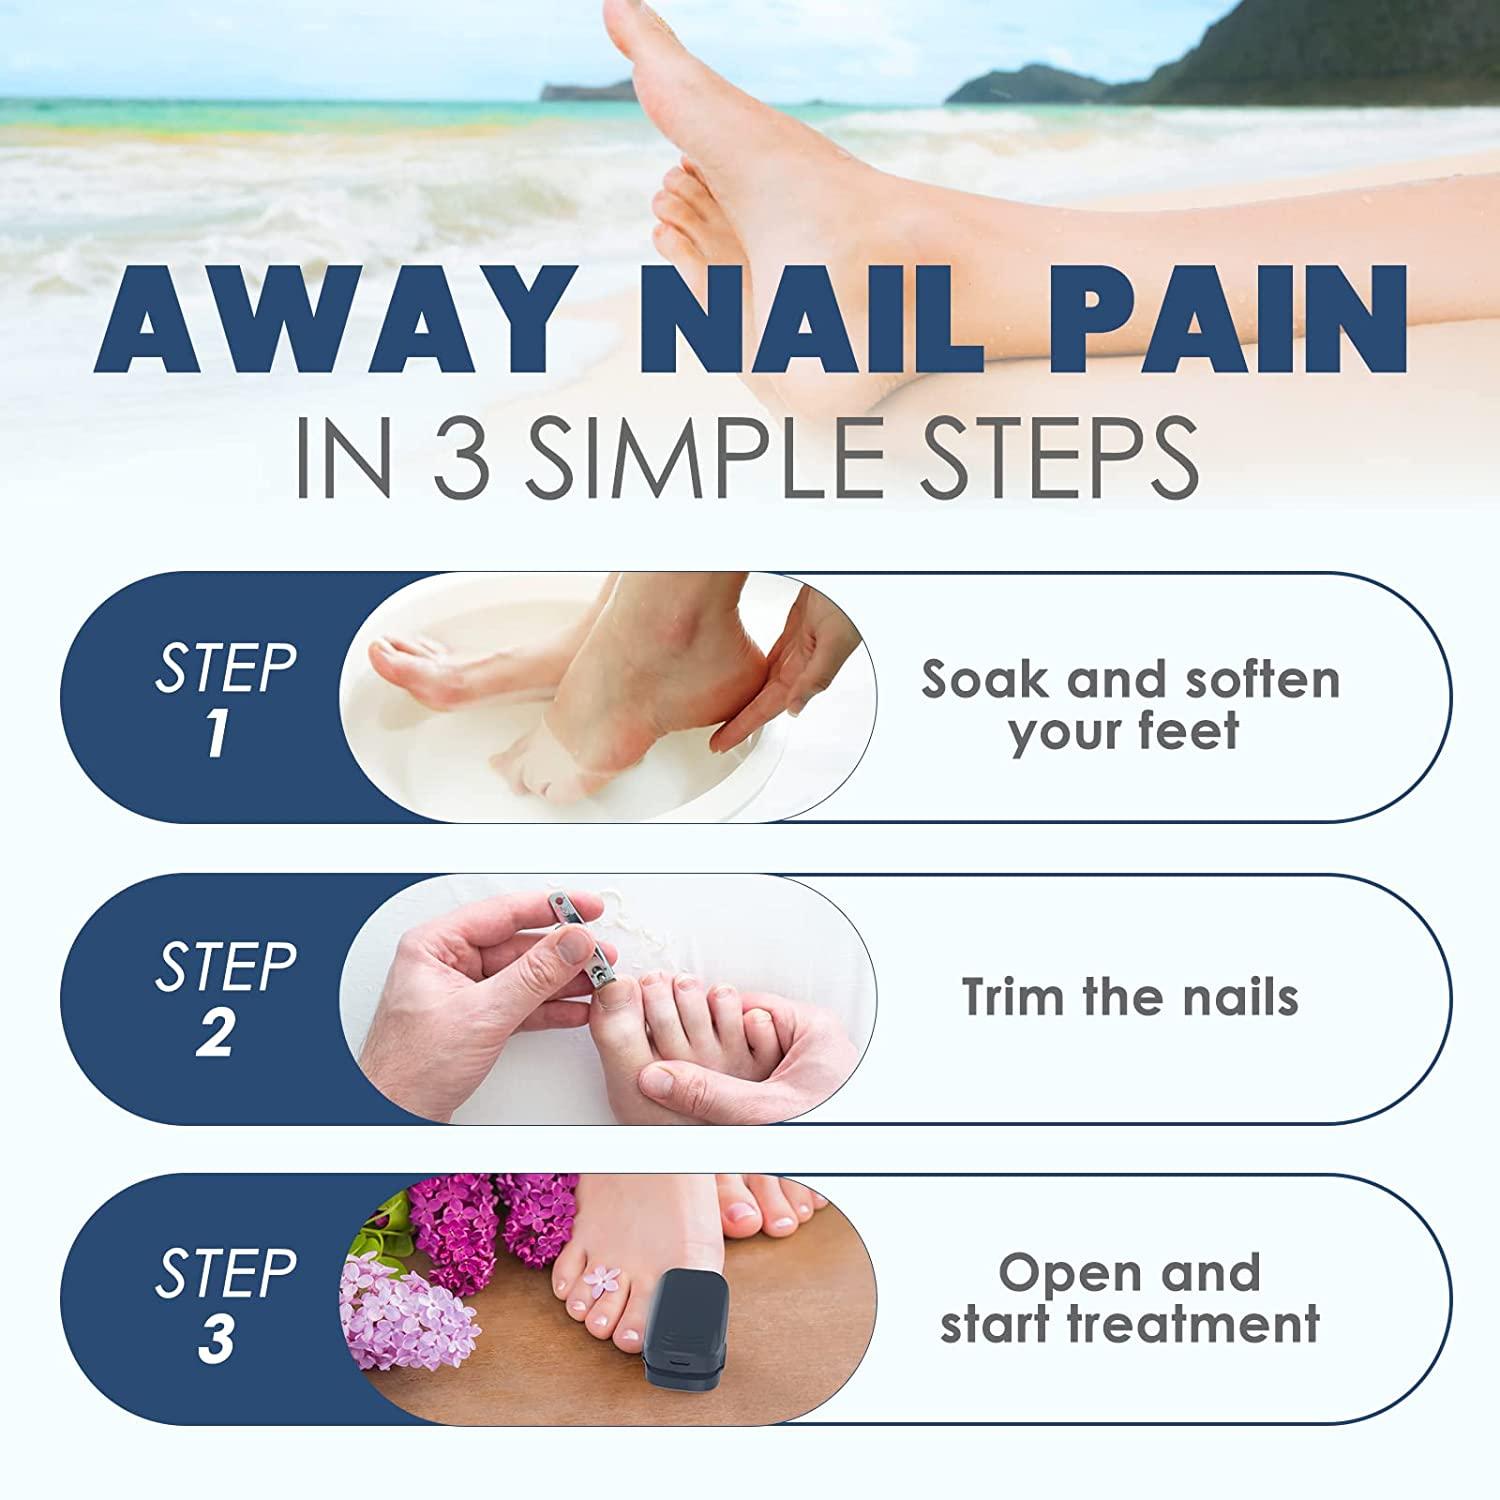 Causes, symptoms and complications of toenail fungus